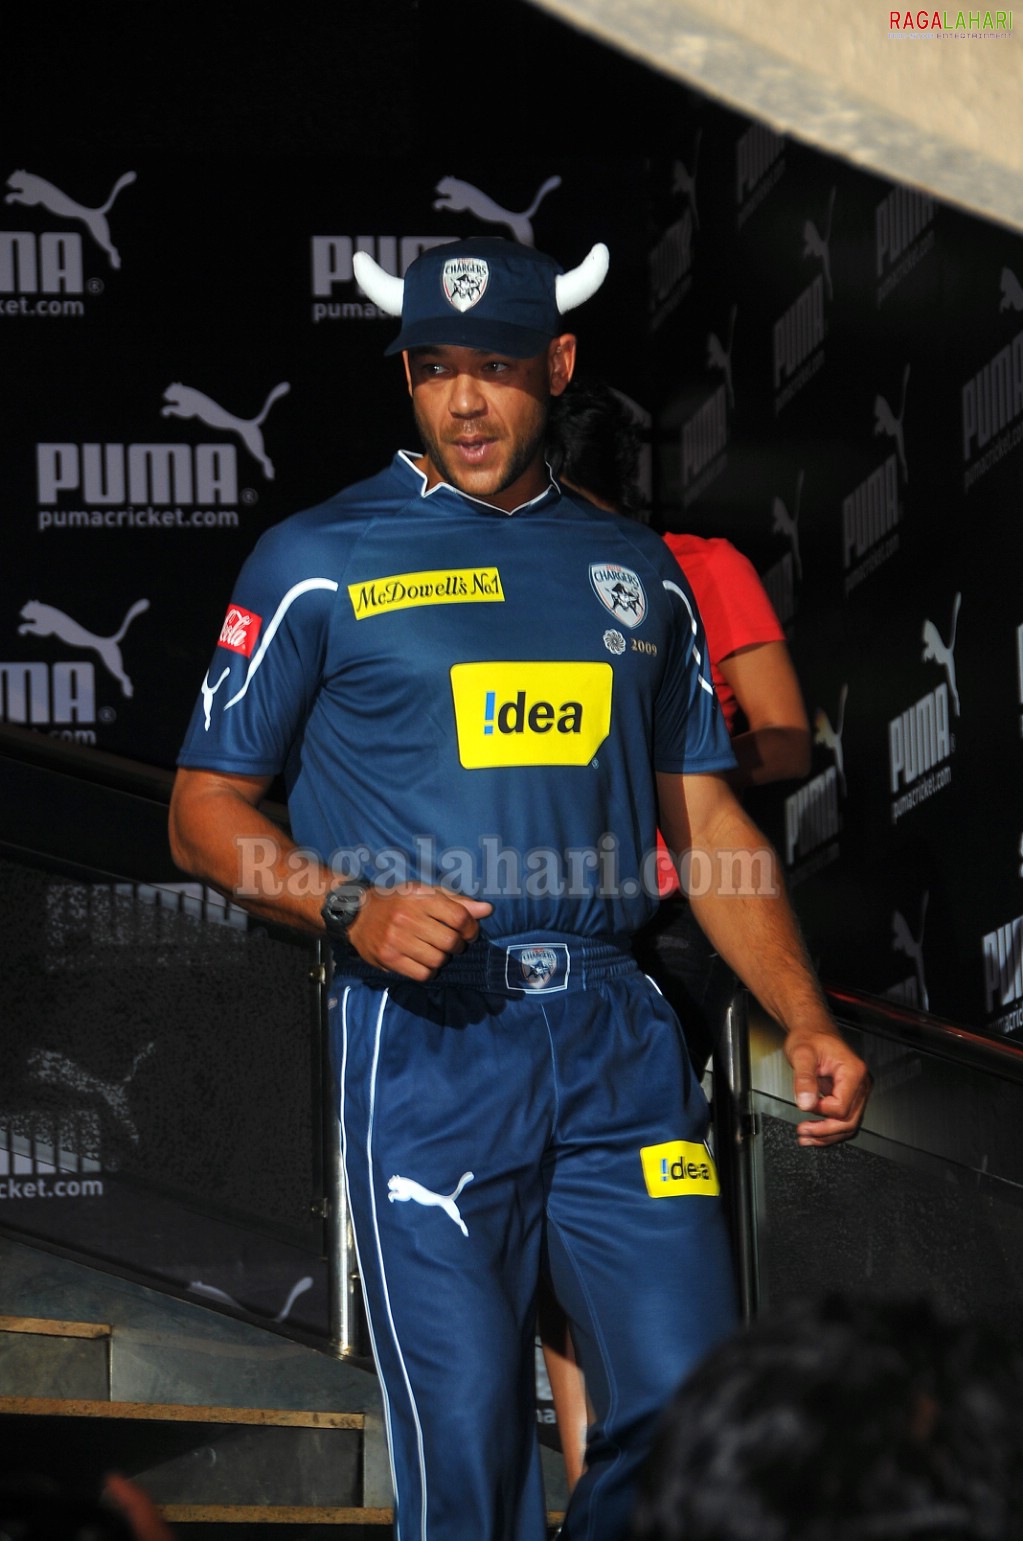 Deccan Chargers Team with Mandira Bedi at Bottles & Chimney for Puma Promotional Event